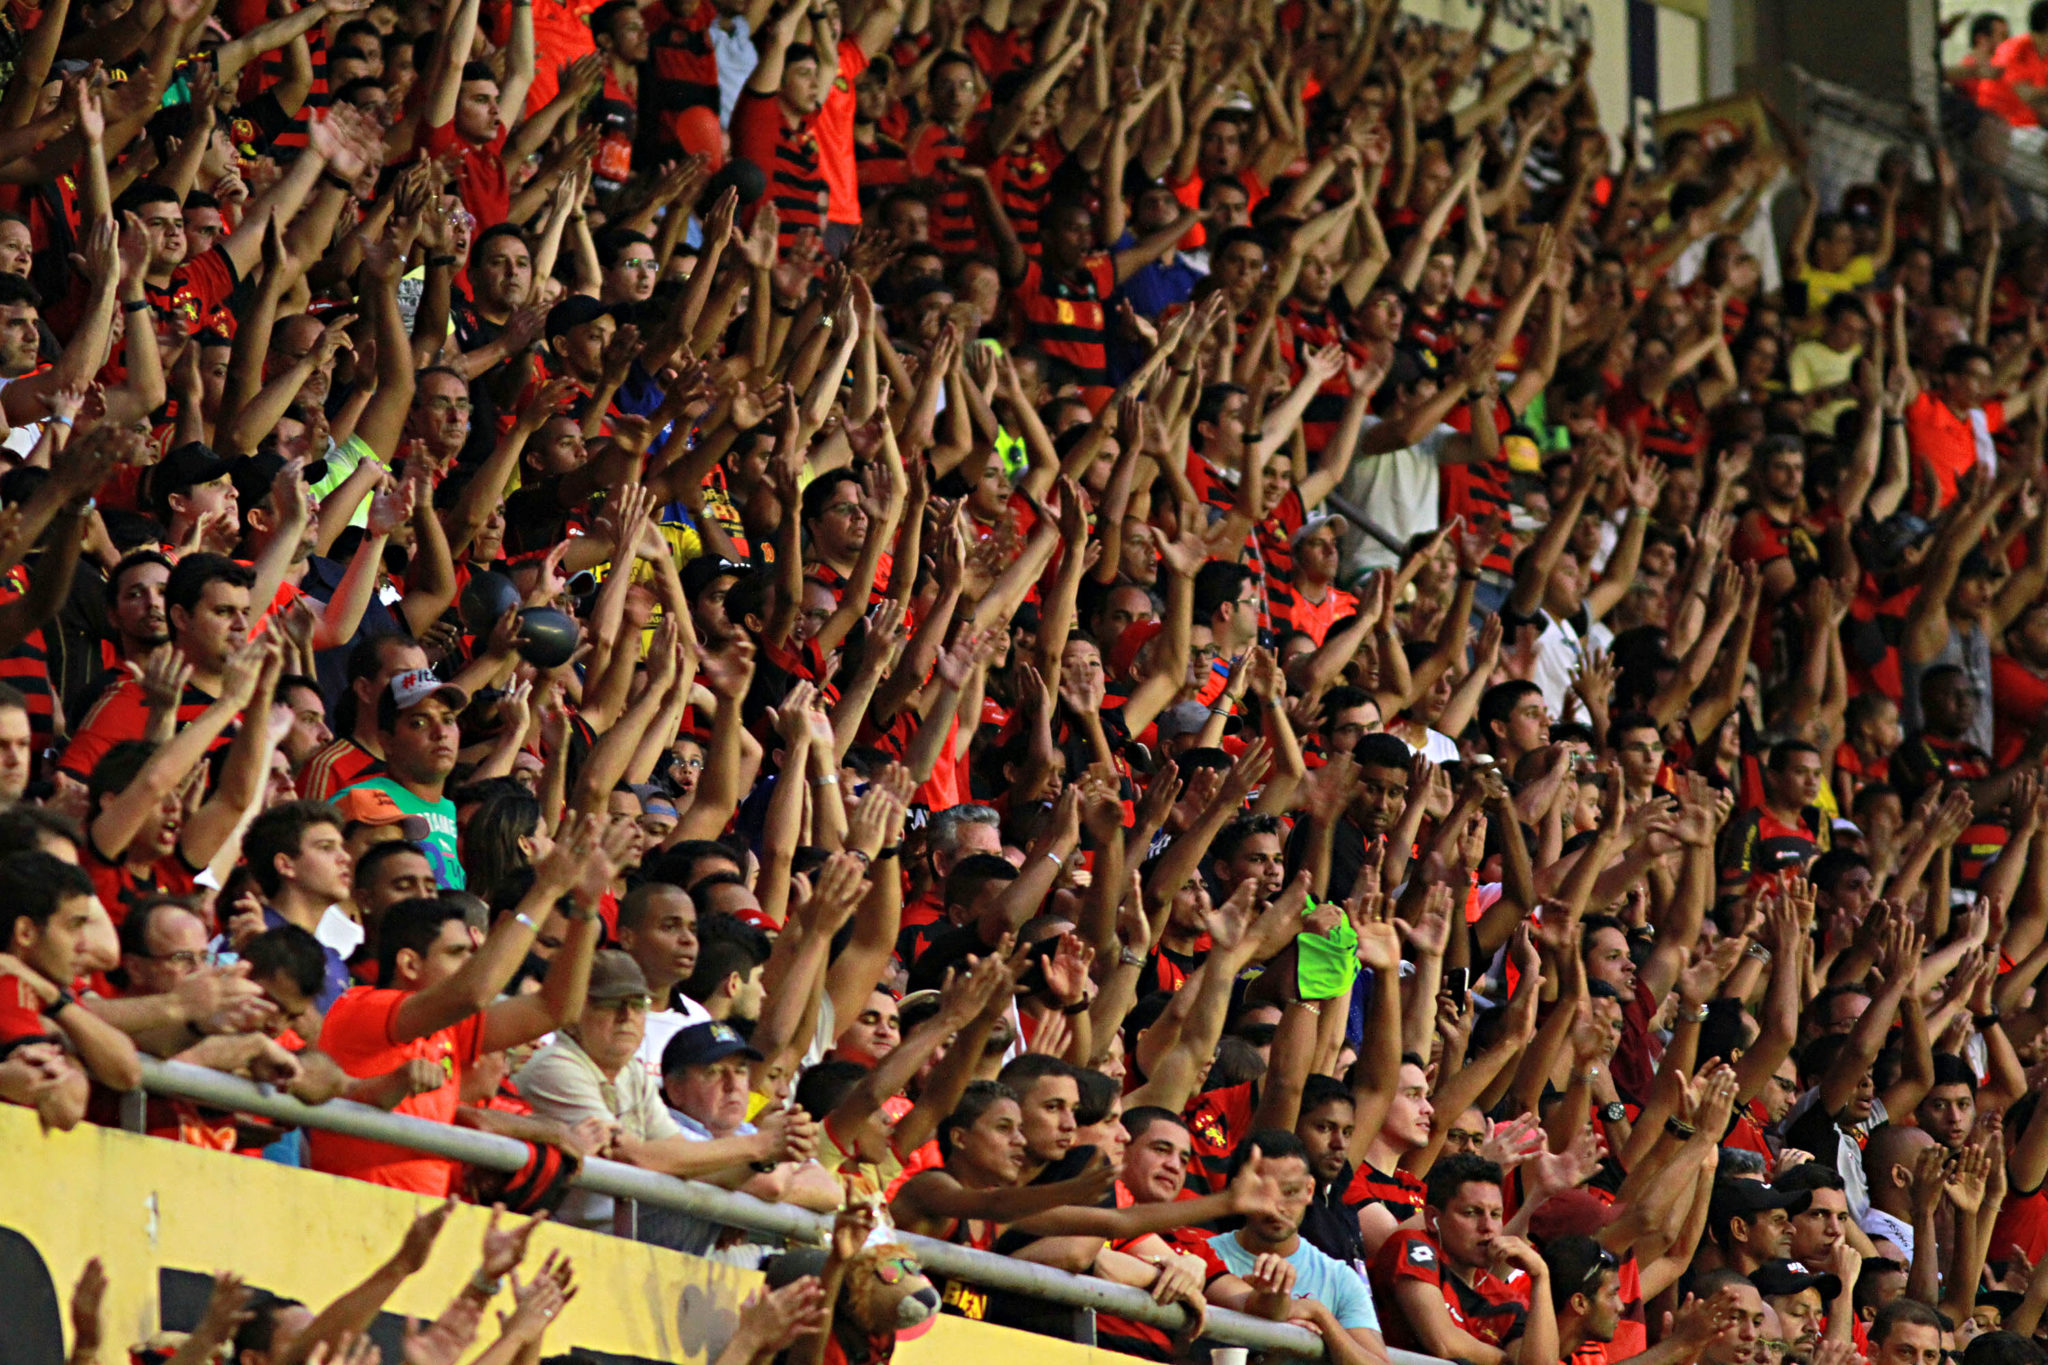 RECIFE, BRAZIL - NOVEMBER 2: Fans of Sport Recife celebrate a pelnaty during the Brasileirao Series A 2014 match between Sport Recife and Figueirense at Ilha do Retiro Stadium on November 2, 2014 in Recife, Brazil. (Photo by Renato Spencer/Getty Images)